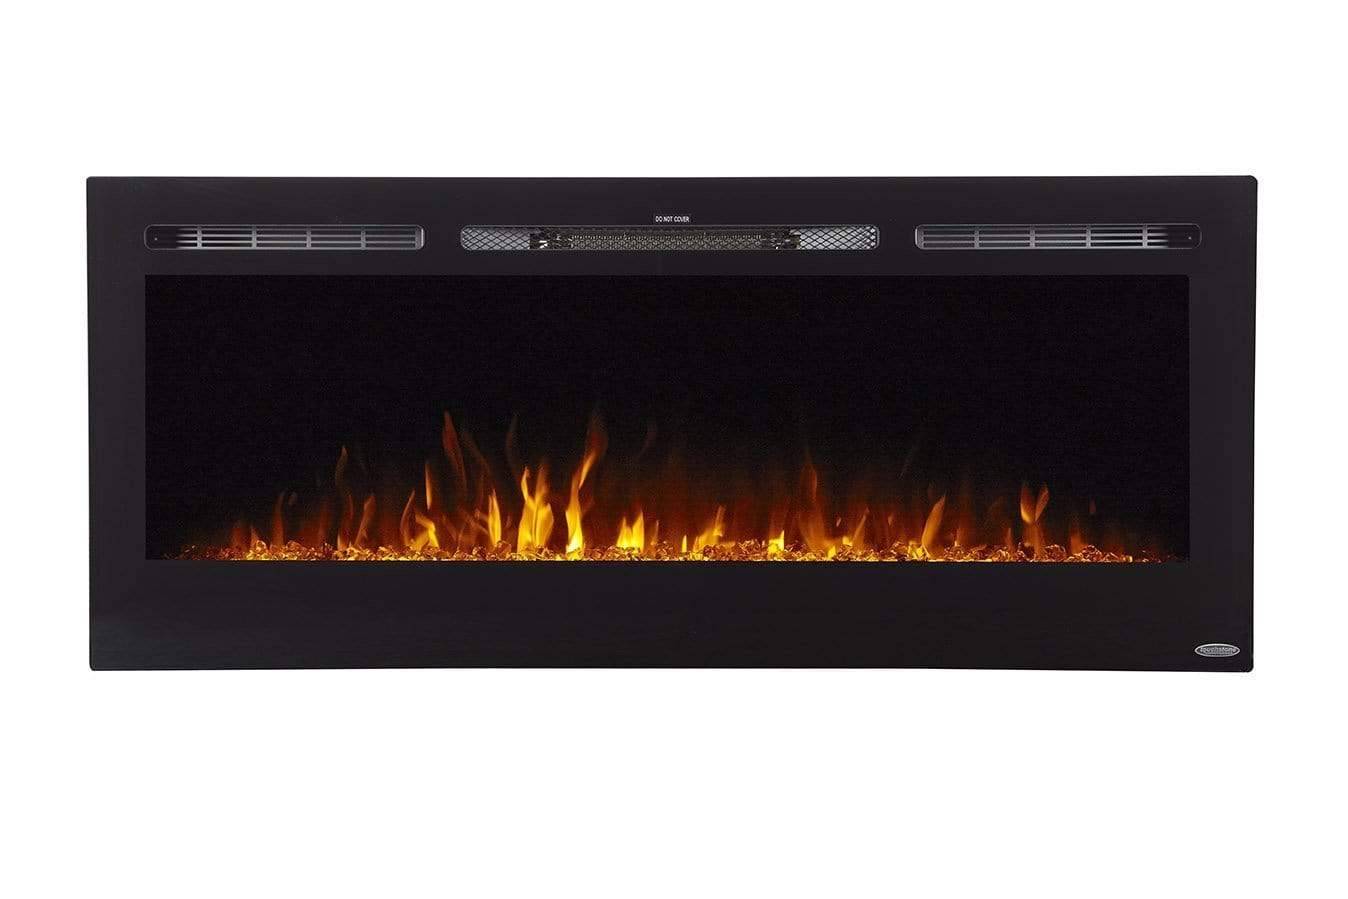 StarWood Fireplaces - Touchstone The Sideline 50 80004 -50 Inch Recessed Electric Fireplace - Yes- Add Bundle [+$49.00]